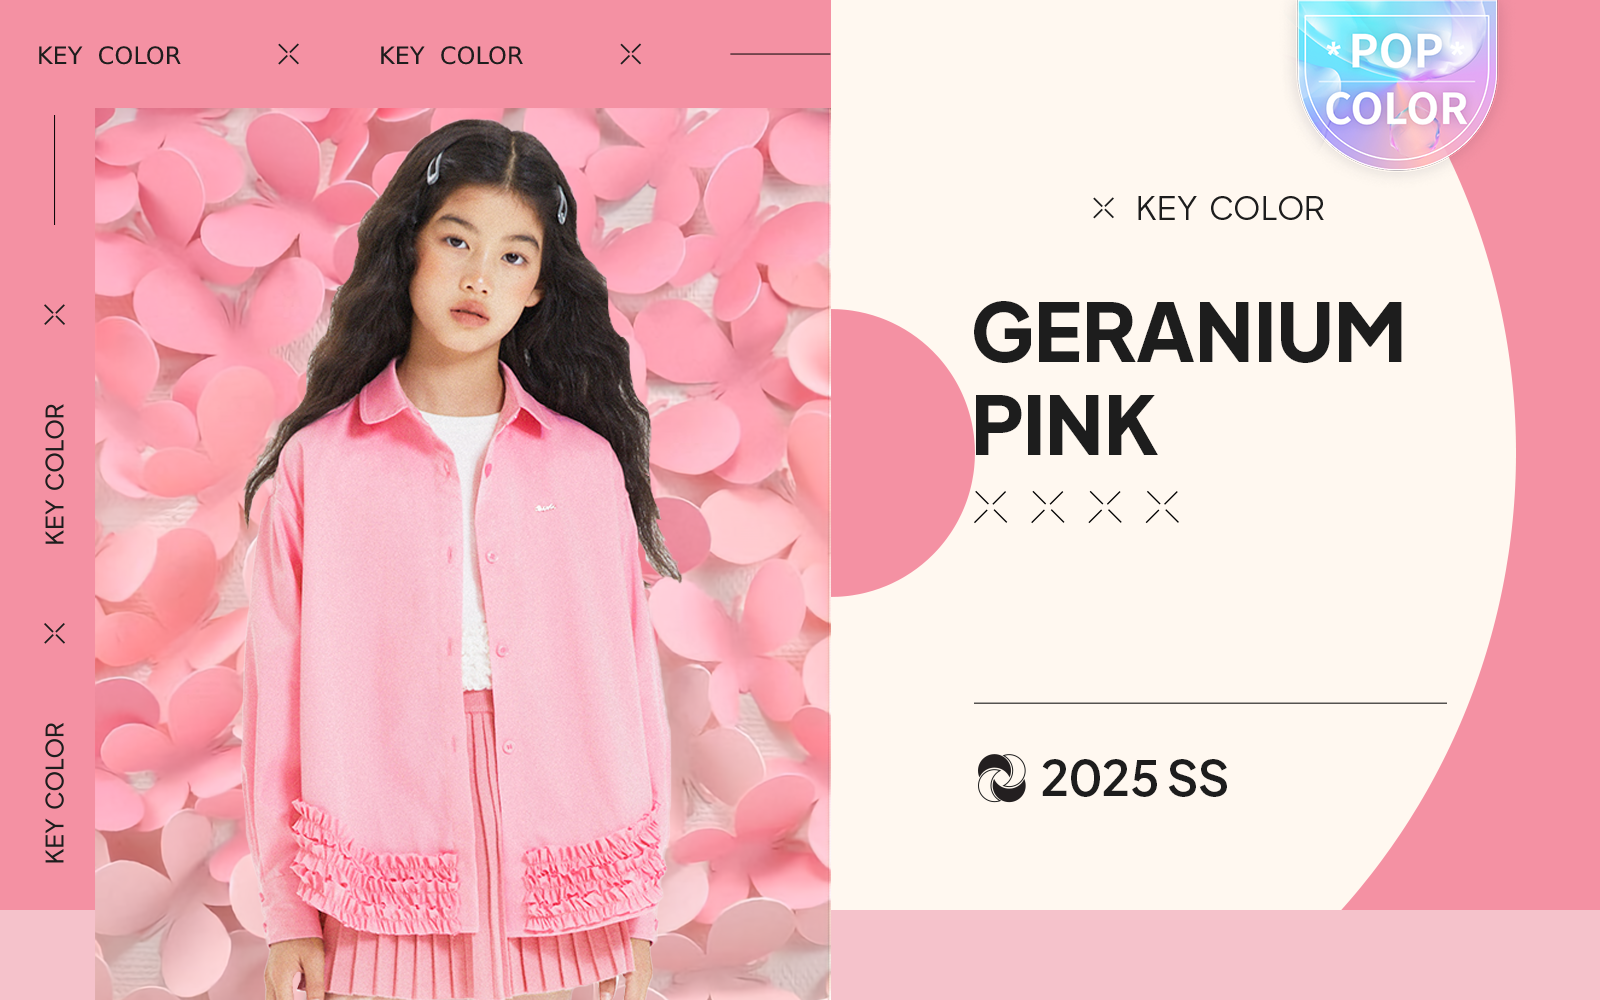 Geranium Pink -- The Color Trend for Girlswear